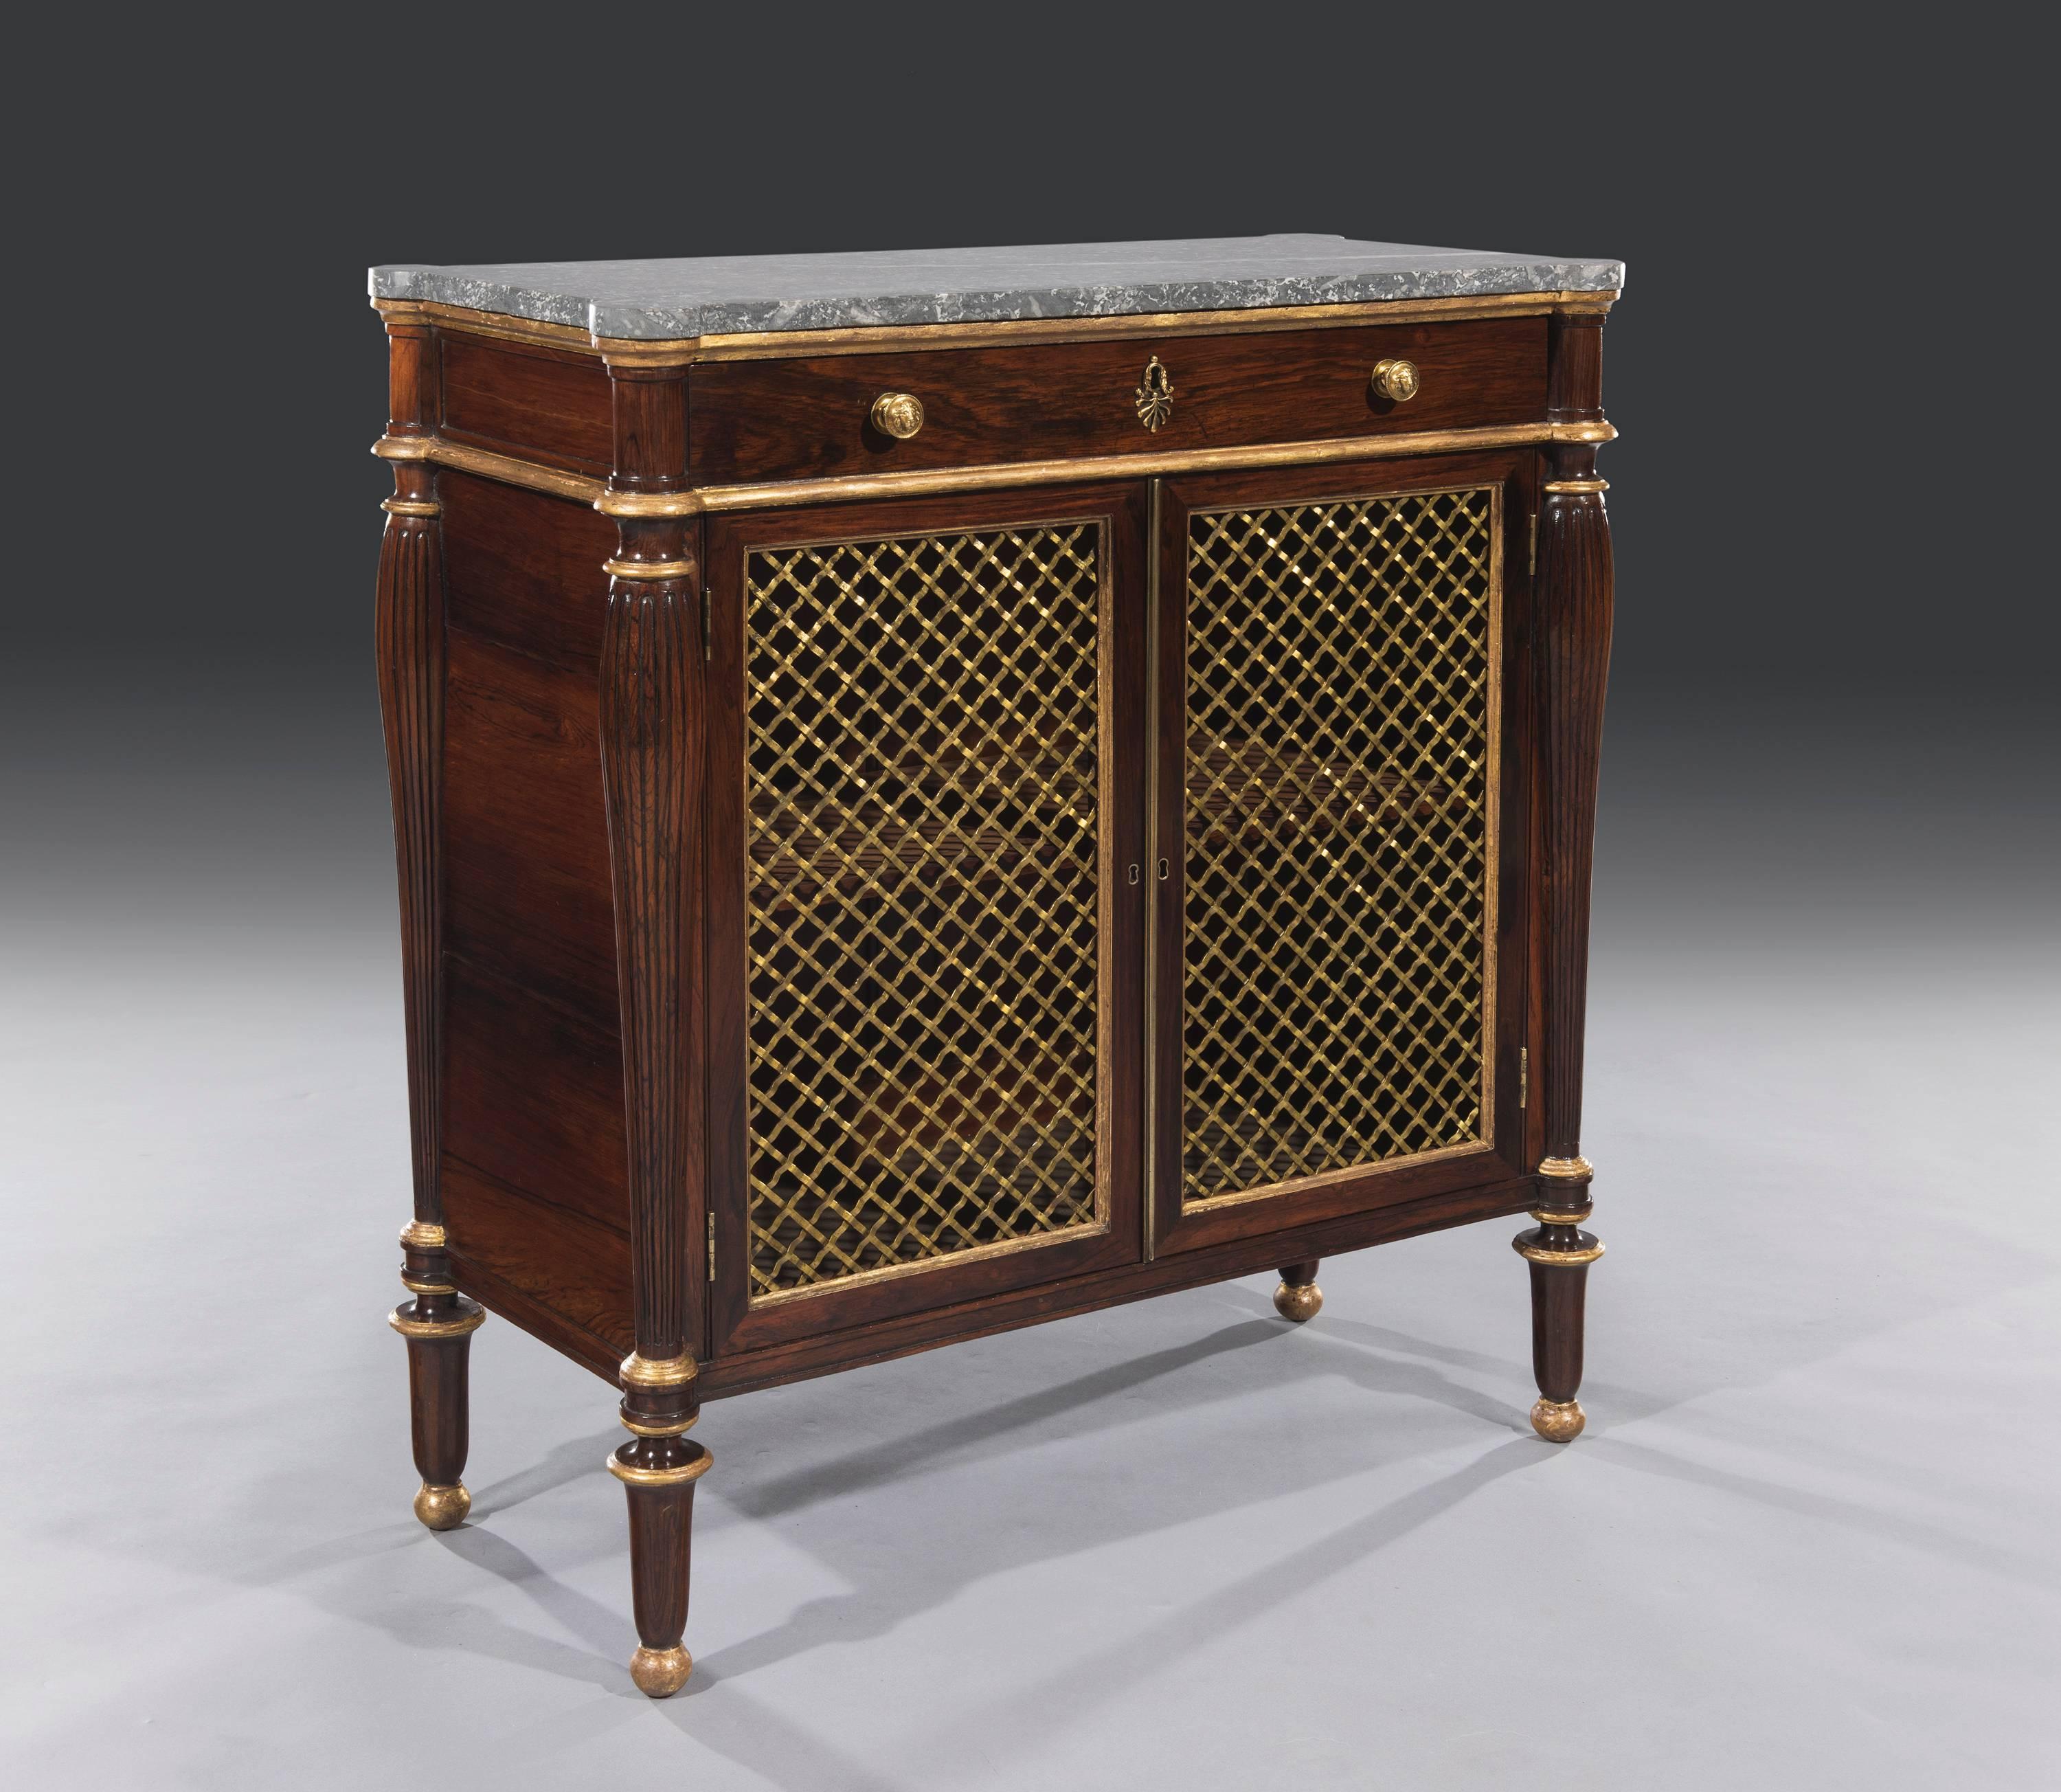 George IV Regency period rosewood marble-top cabinet.
The small elegant rosewood side cabinet with a rectangular shaped 'St Anne' marble top sits below water gilded mouldings and a full length mahogany lined drawer. The shaped bulbous columns Stand